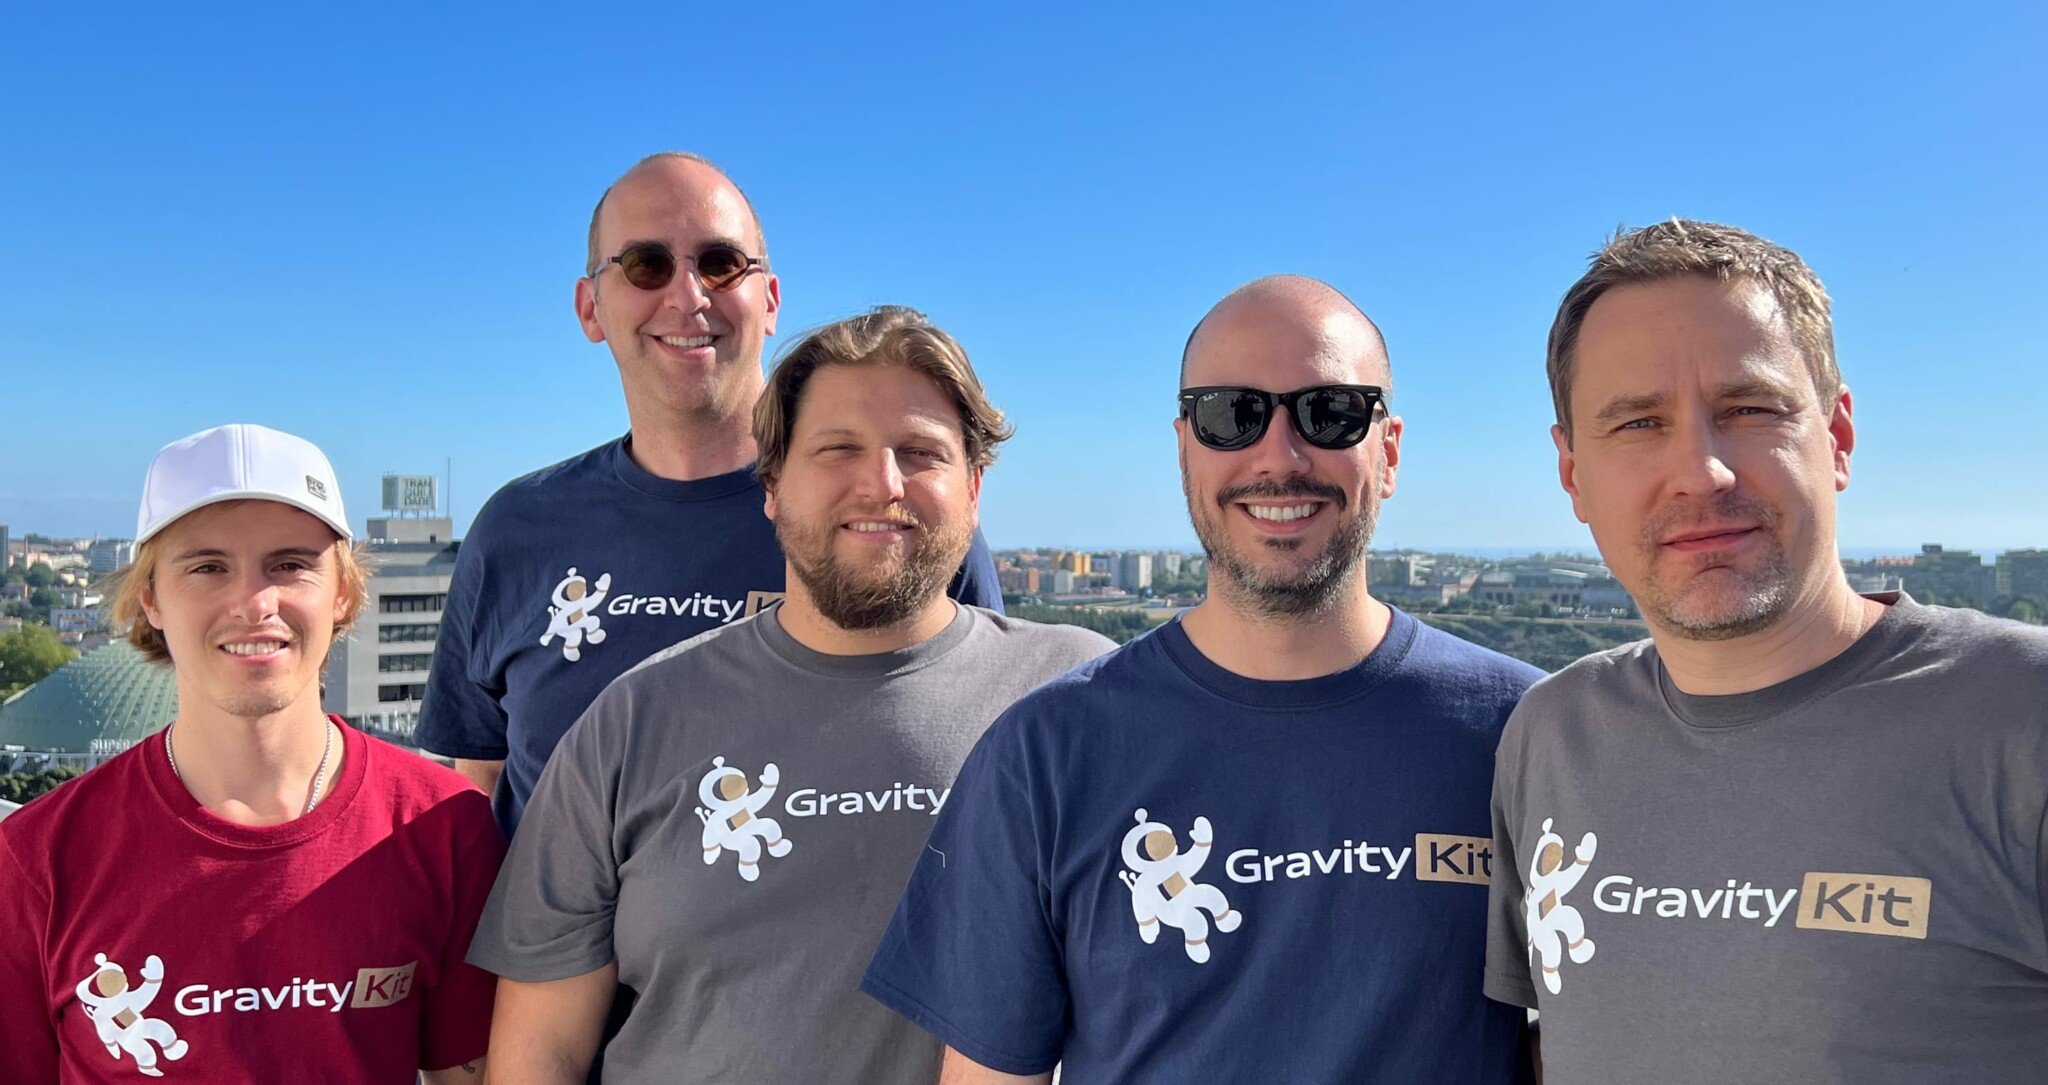 GravityKit Team on a sunny day at WordCamp Europe 2022